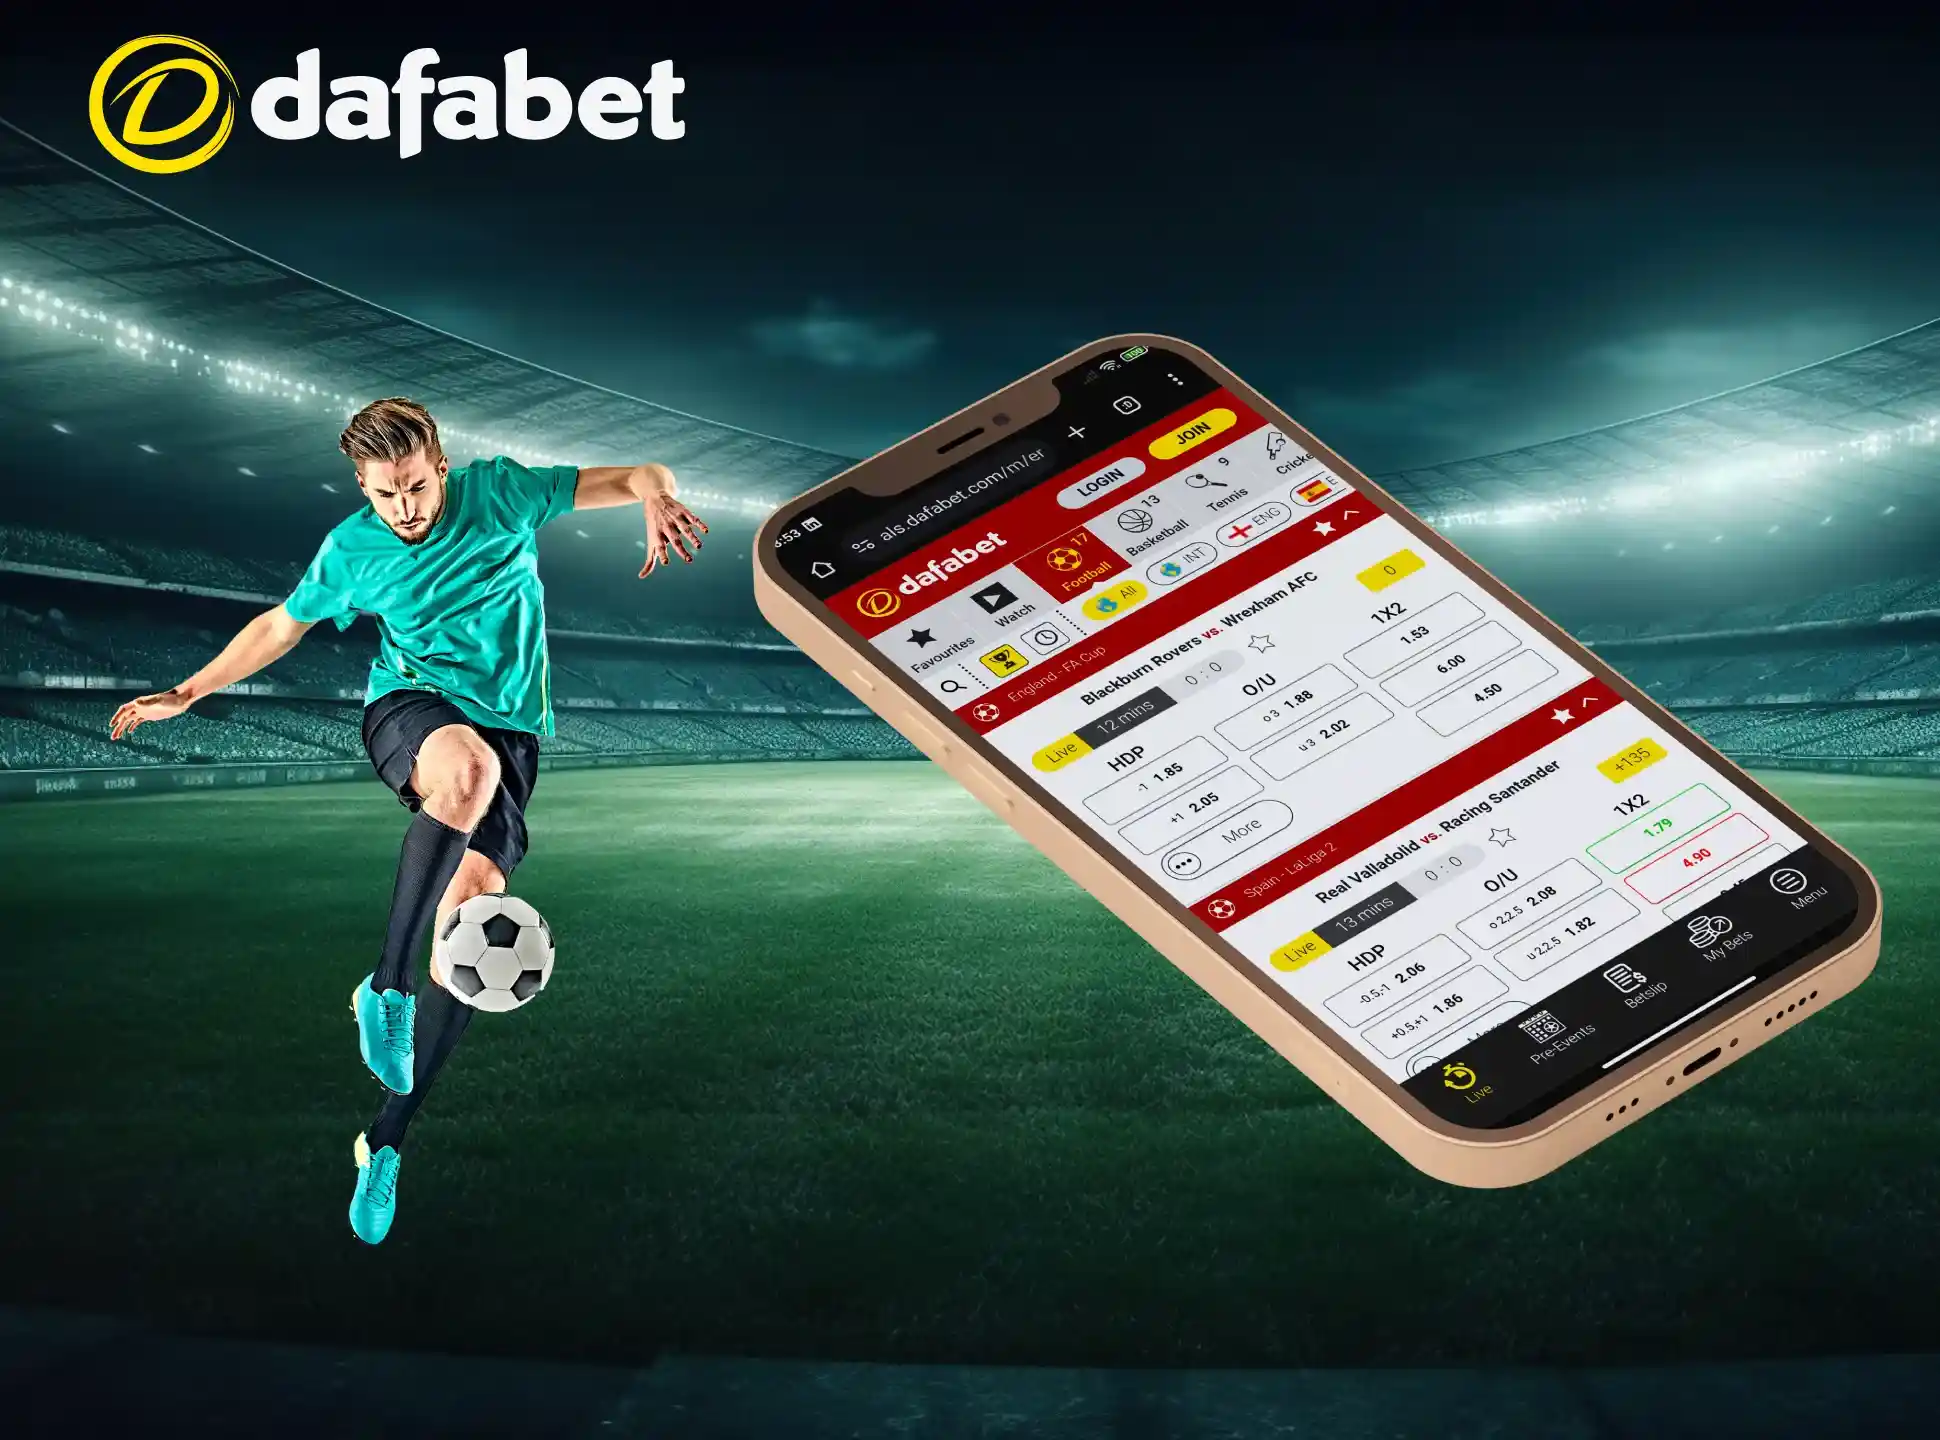 The Dafabet betting app offers betting on football.